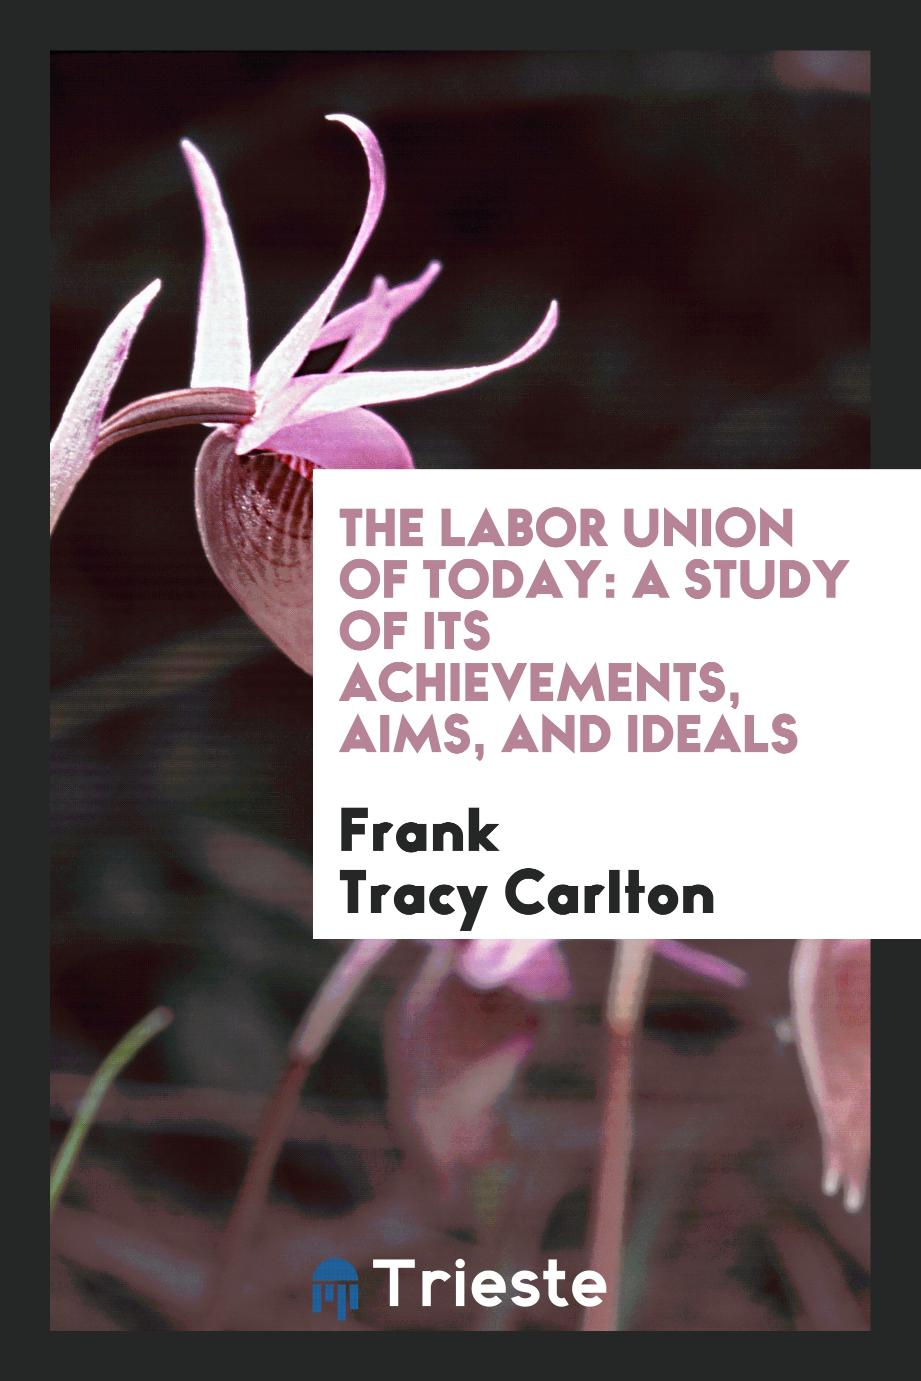 The Labor Union of Today: A Study of Its Achievements, Aims, and Ideals